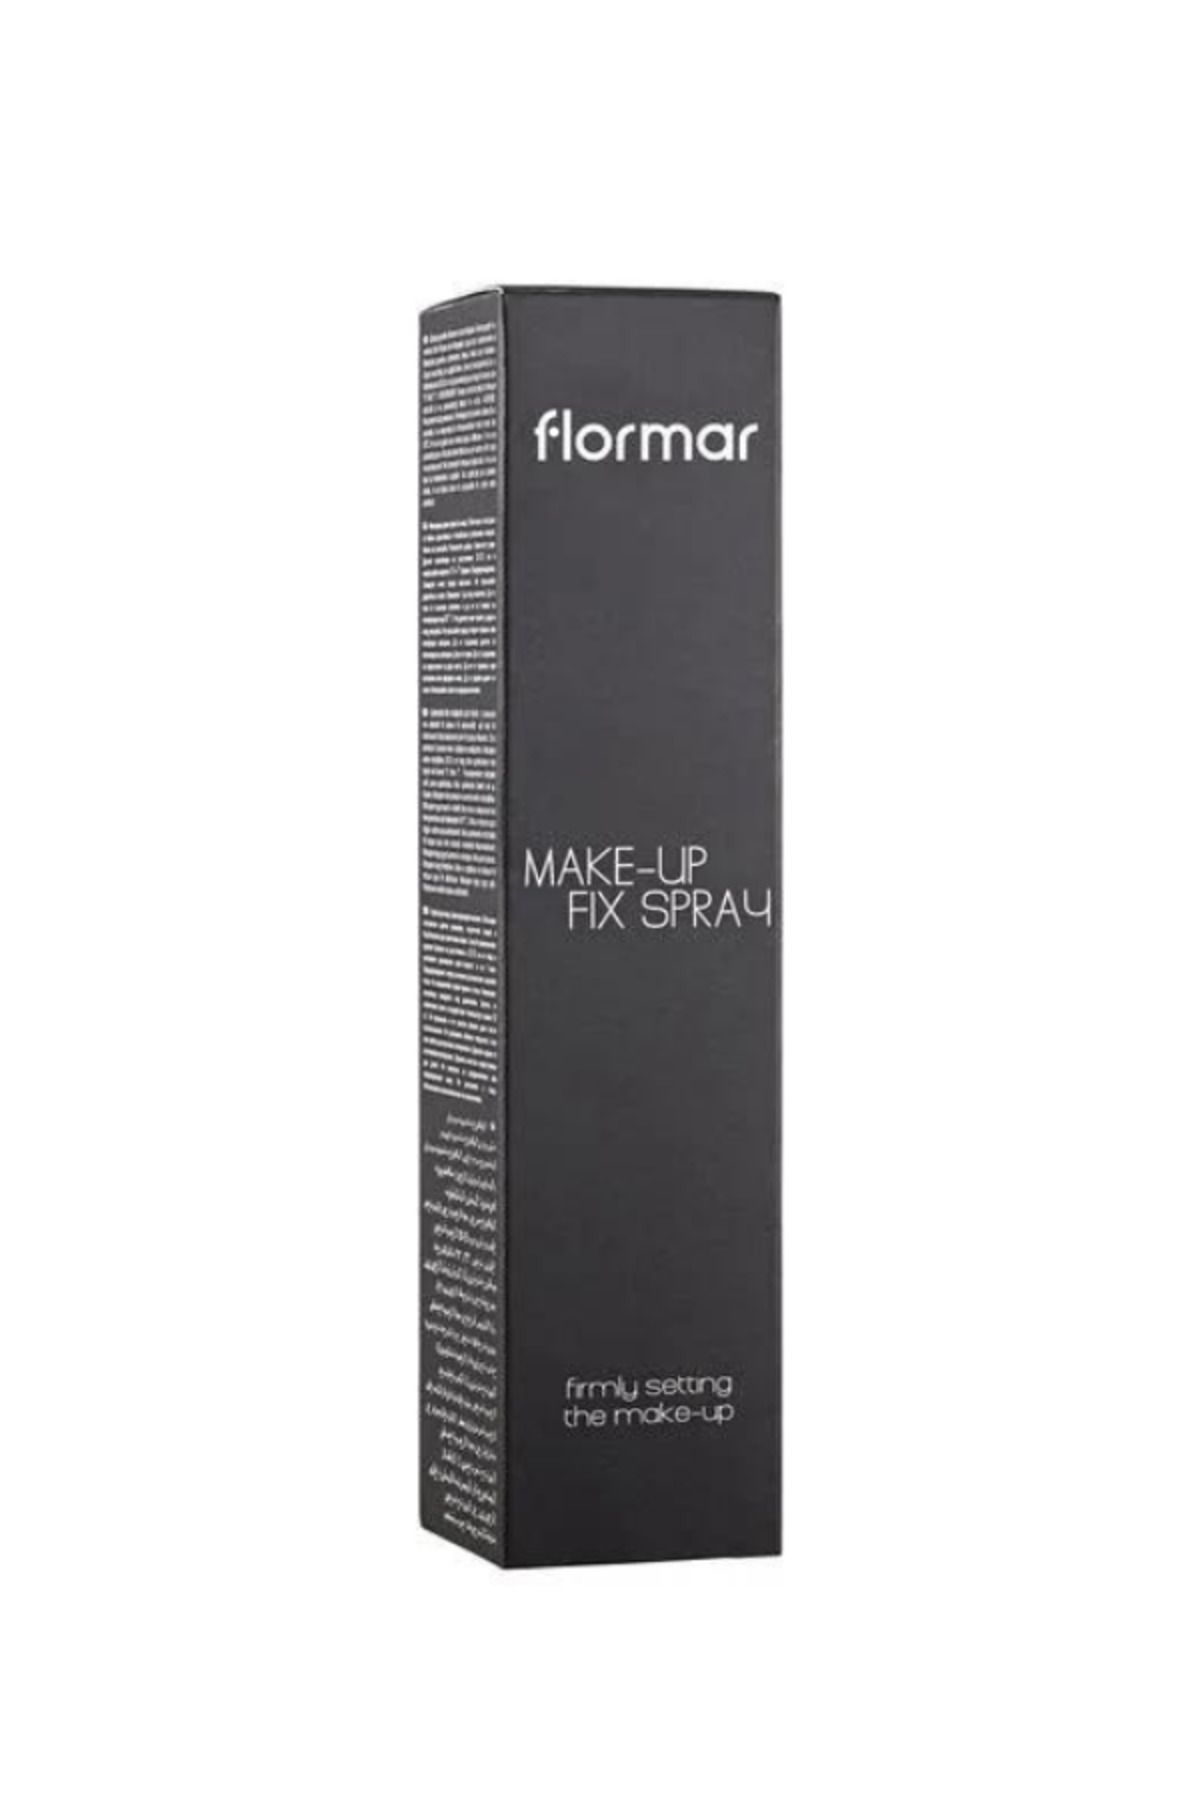 Flormar MAKEUP FİXİNG SPRAY WİTH CHAMOMİLE AND CUCUMBER JUİCE EXTRACT / 001 MAKEUP FIX SPRAY PSSN2449